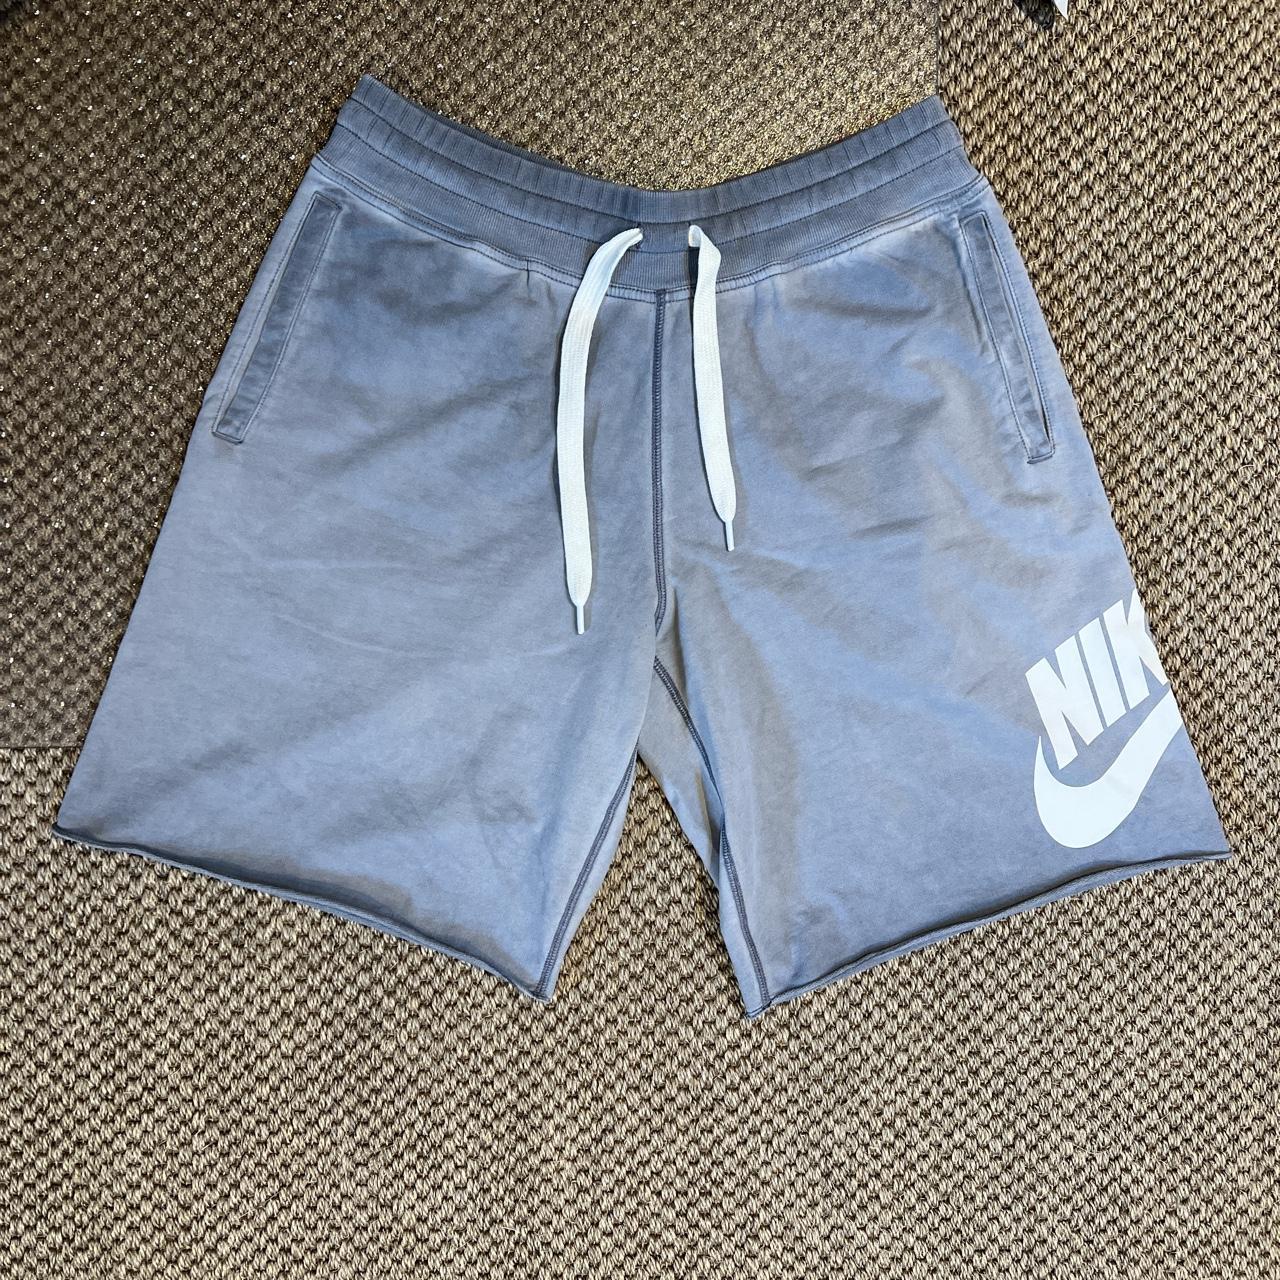 Nike shorts Grey Mens size xl Used - In great... - Depop